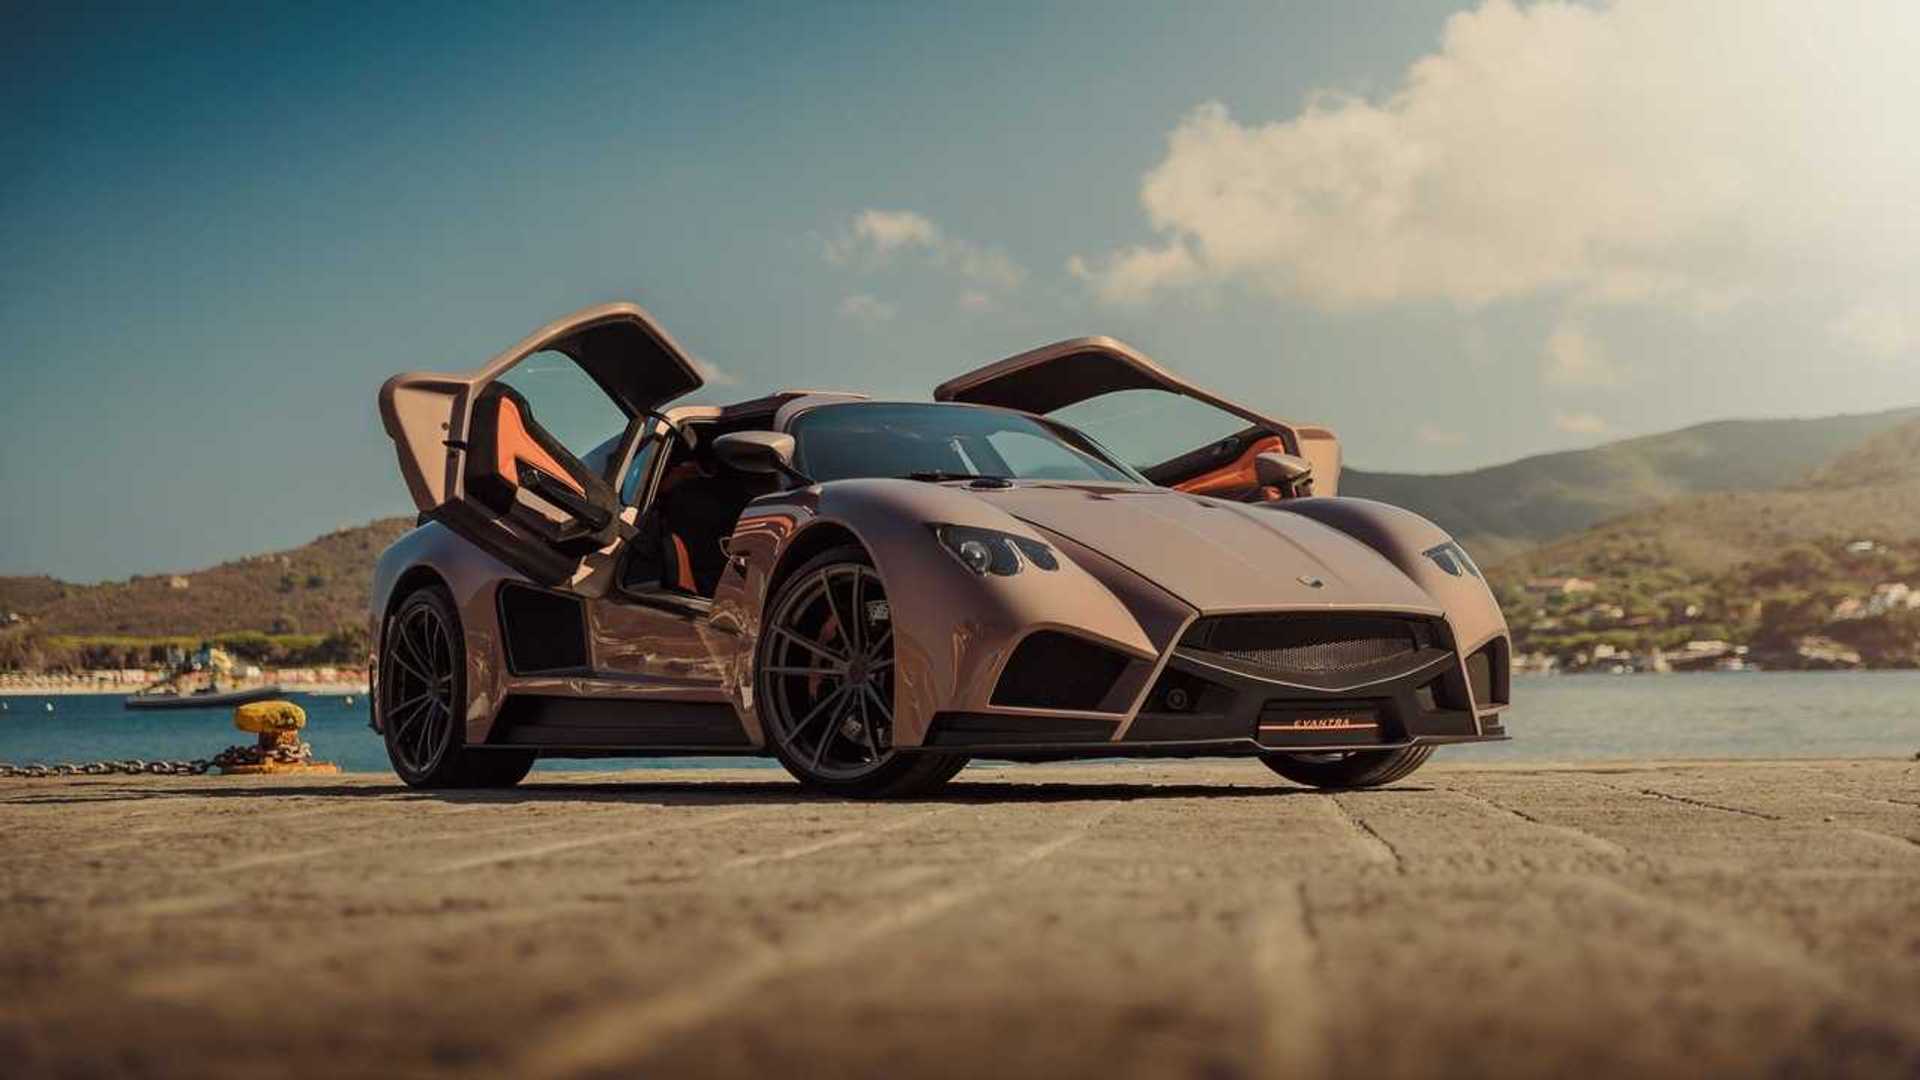 Front-angled image of a bronze-coloured Mazzanti Evantra Pura with its unique rear-hinged upward-opening doors.